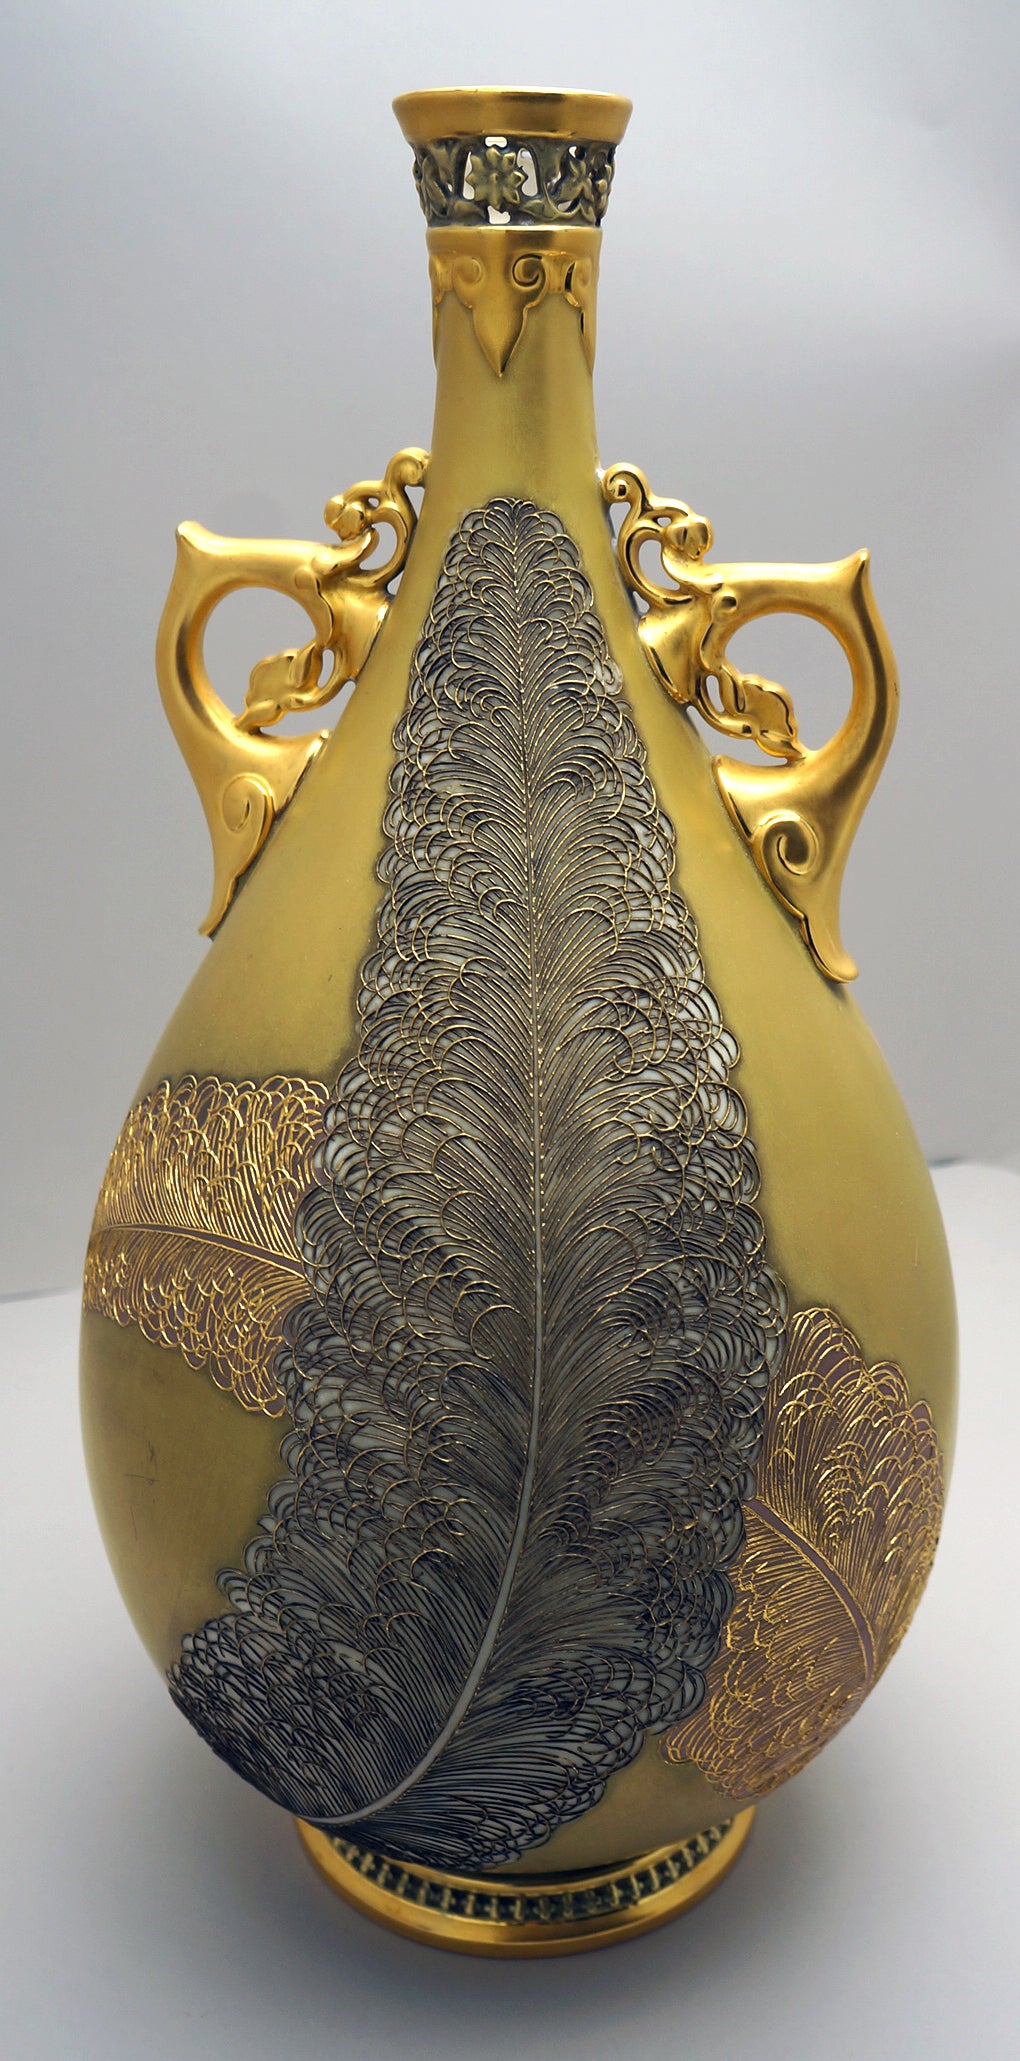 19th c Worcester "Aesthetic Movement" Monumental Vase W/Feathers